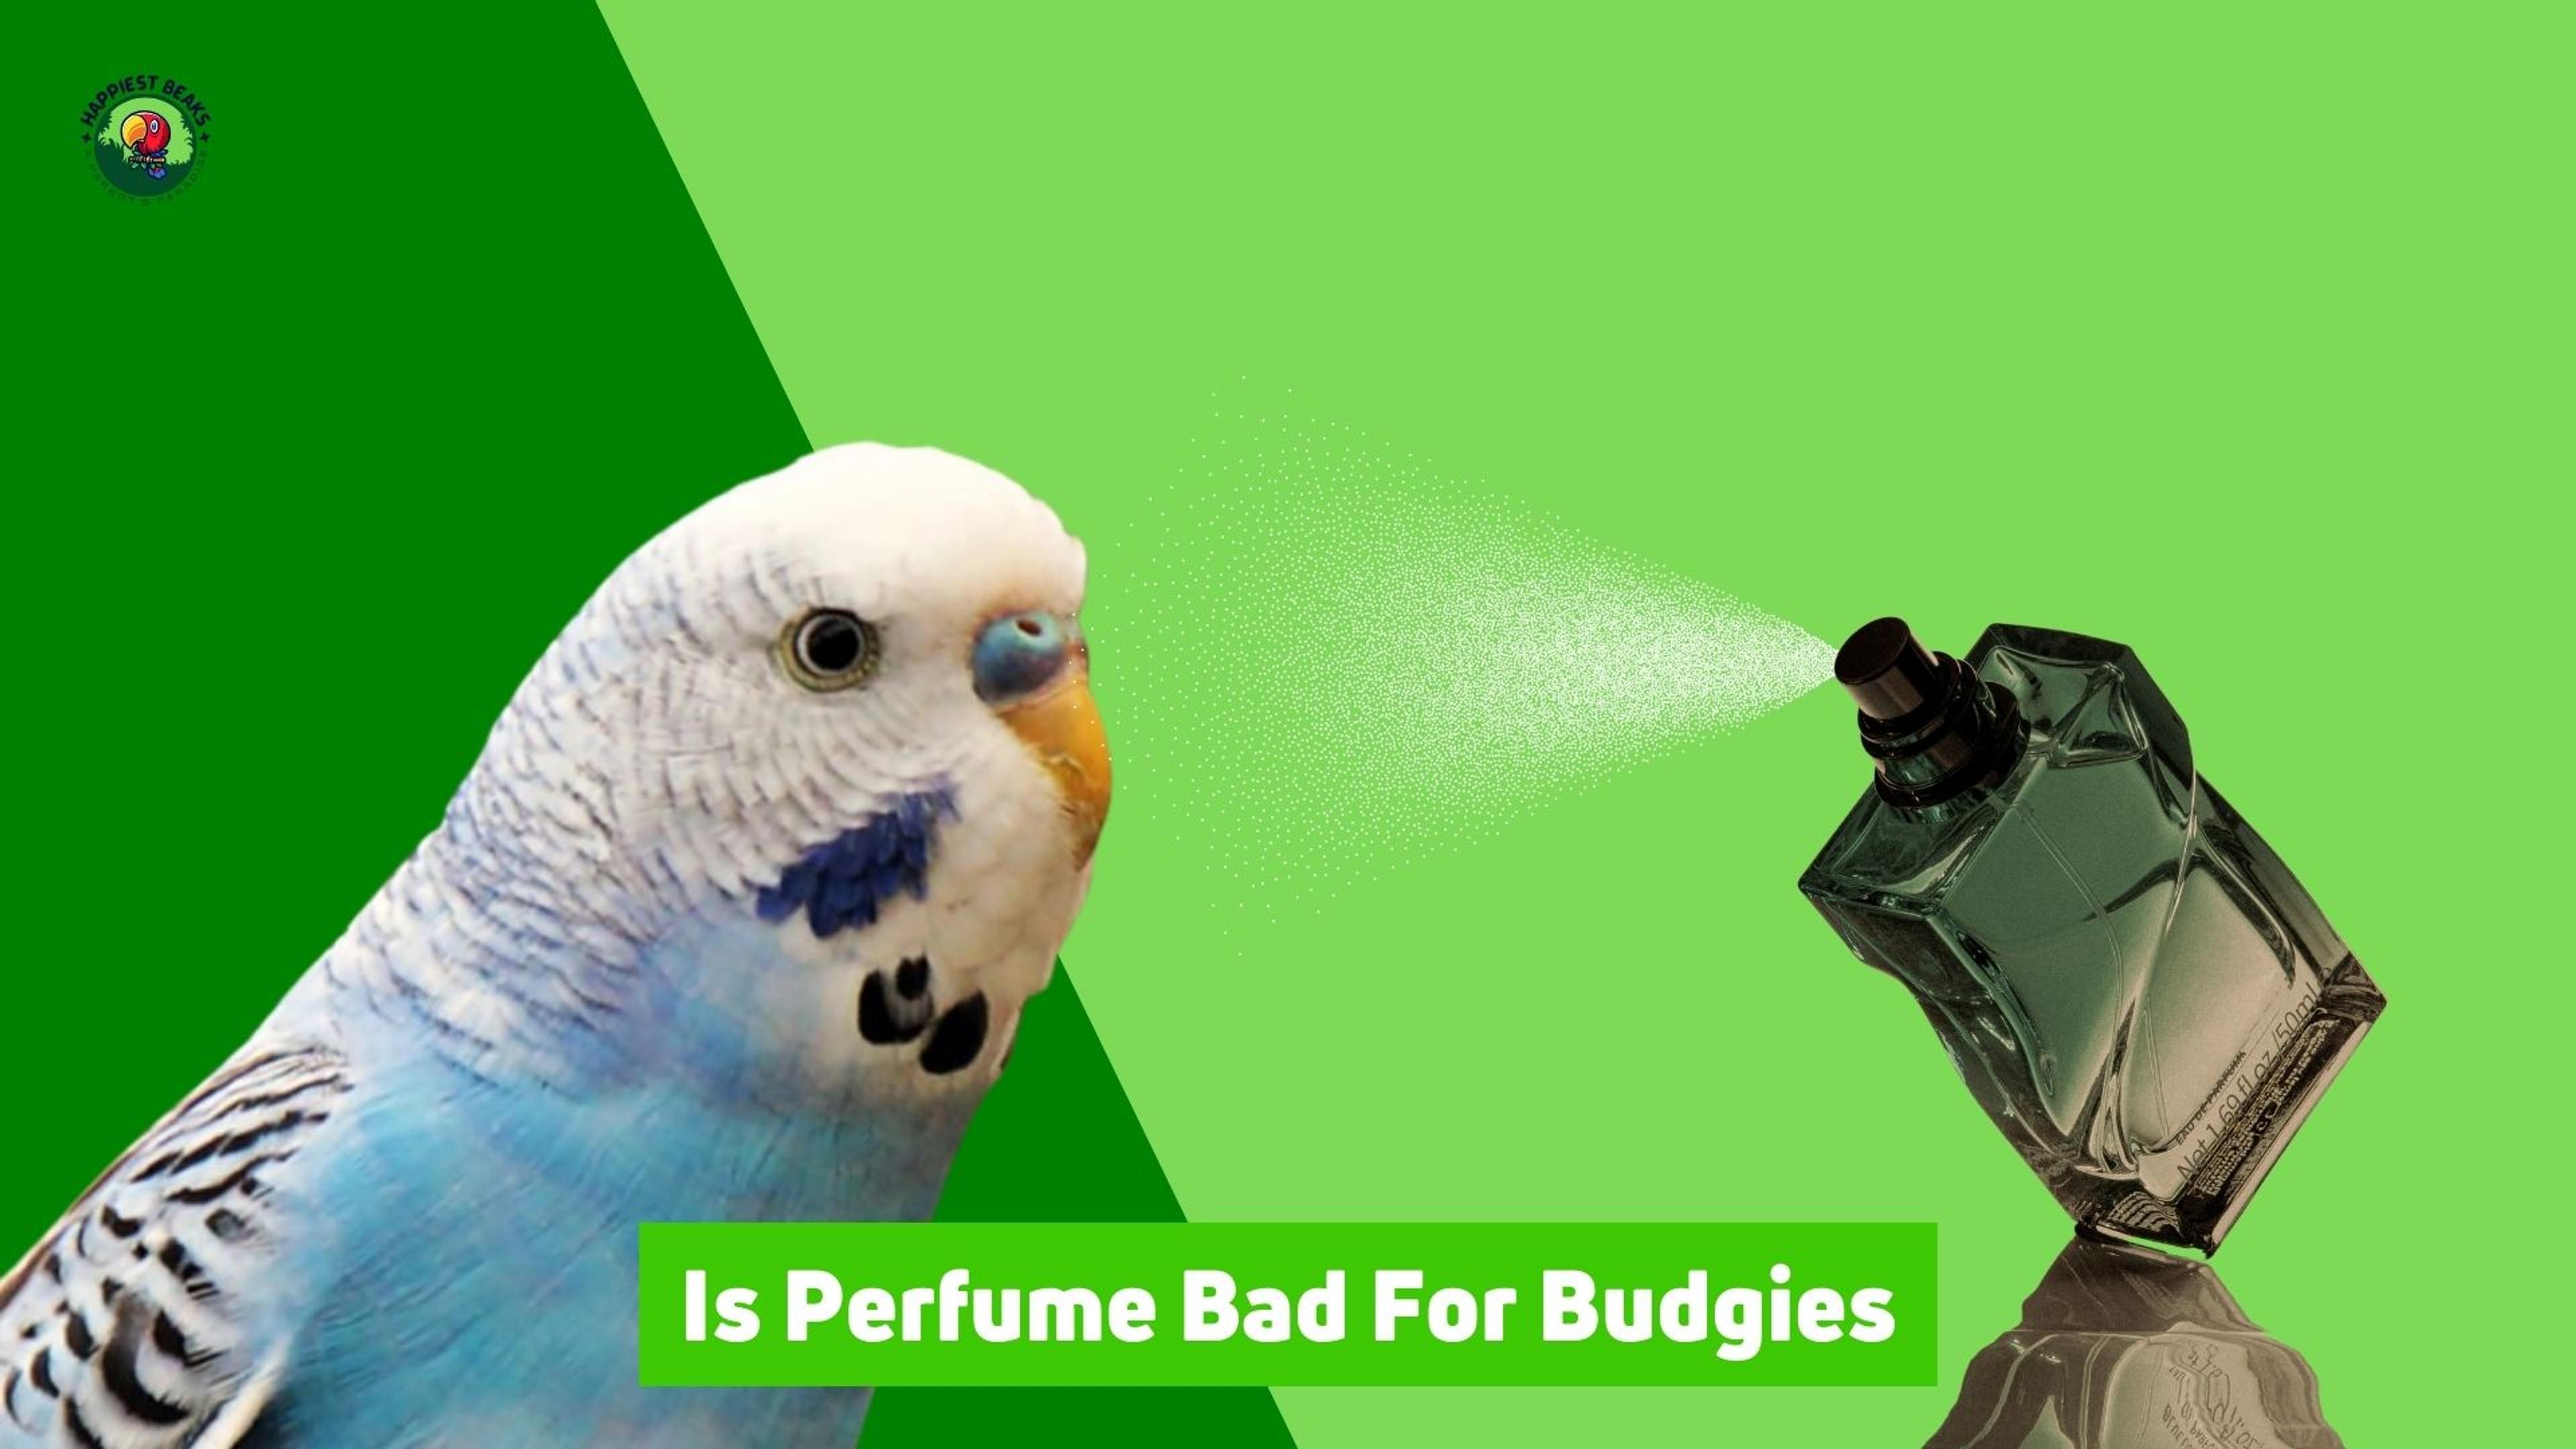 Is Perfume Bad for Budgies?